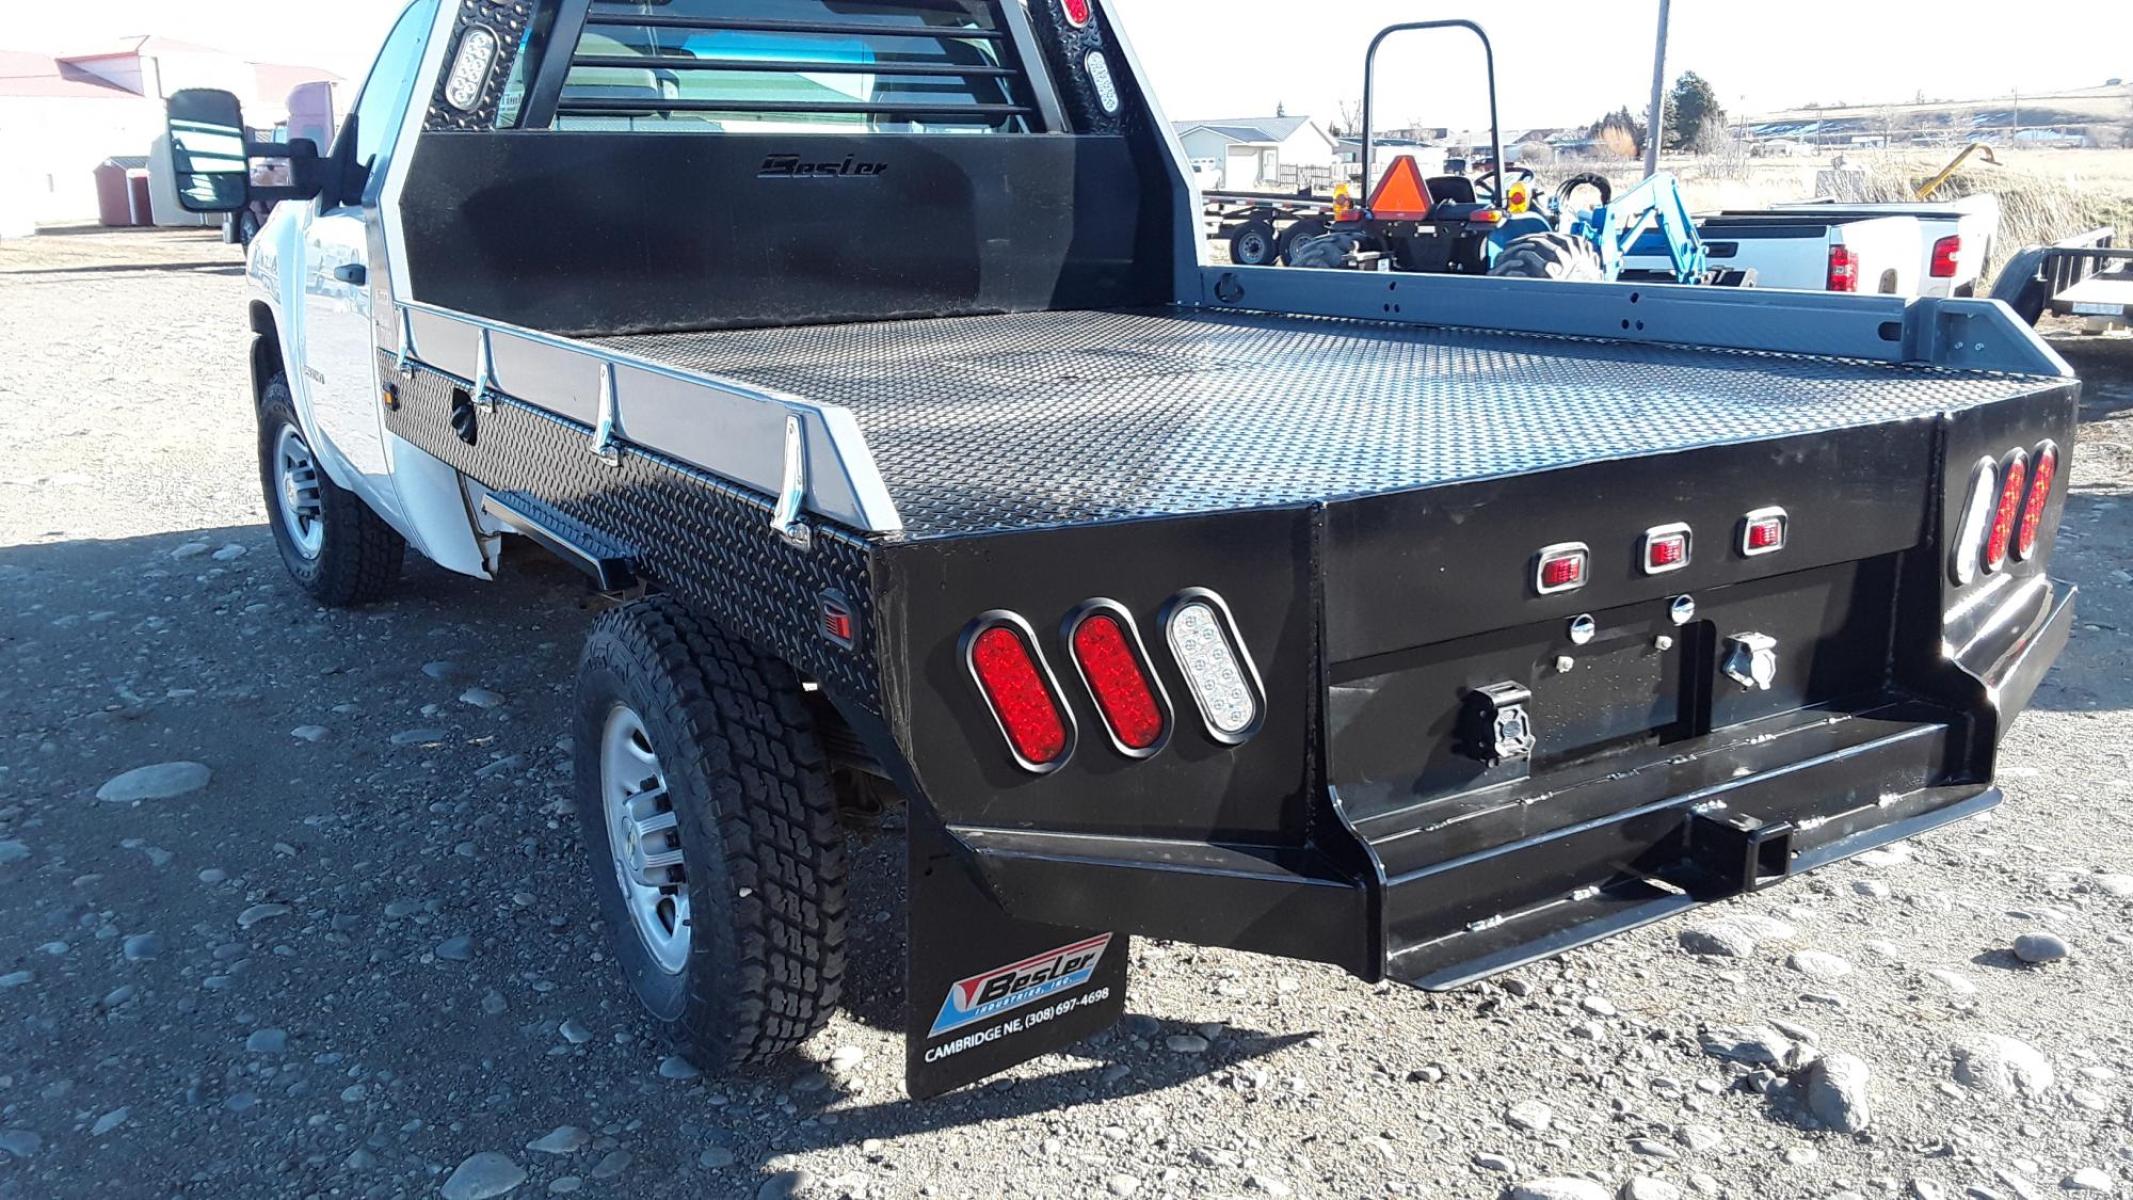 2022 Black Besler Flatbed , located at 310 West 1st Ave, Big Timber, MT, 59011, (406) 860-8510, 45.833511, -109.957809 - ALL NEW BESLER 6000 SERIES FLATBED, GN HITCH W- 30K TOW BALL, REAR RECEIVER HITCH, 7 ROUND TRAILER PLUGS, LED LIGHTS, STAKE POCKETS-RUB RAIL, TAPERED REAR. 7 X 7 FOR SHORT WHEEL BASE PU - $4,295.00. 7 X 81-2 FOR LONG WHEEL BASE PU - $4,295.00.	FOLD DOWN SIDES - ADD $200.00. INSTALLATION AVAIL - Photo #0